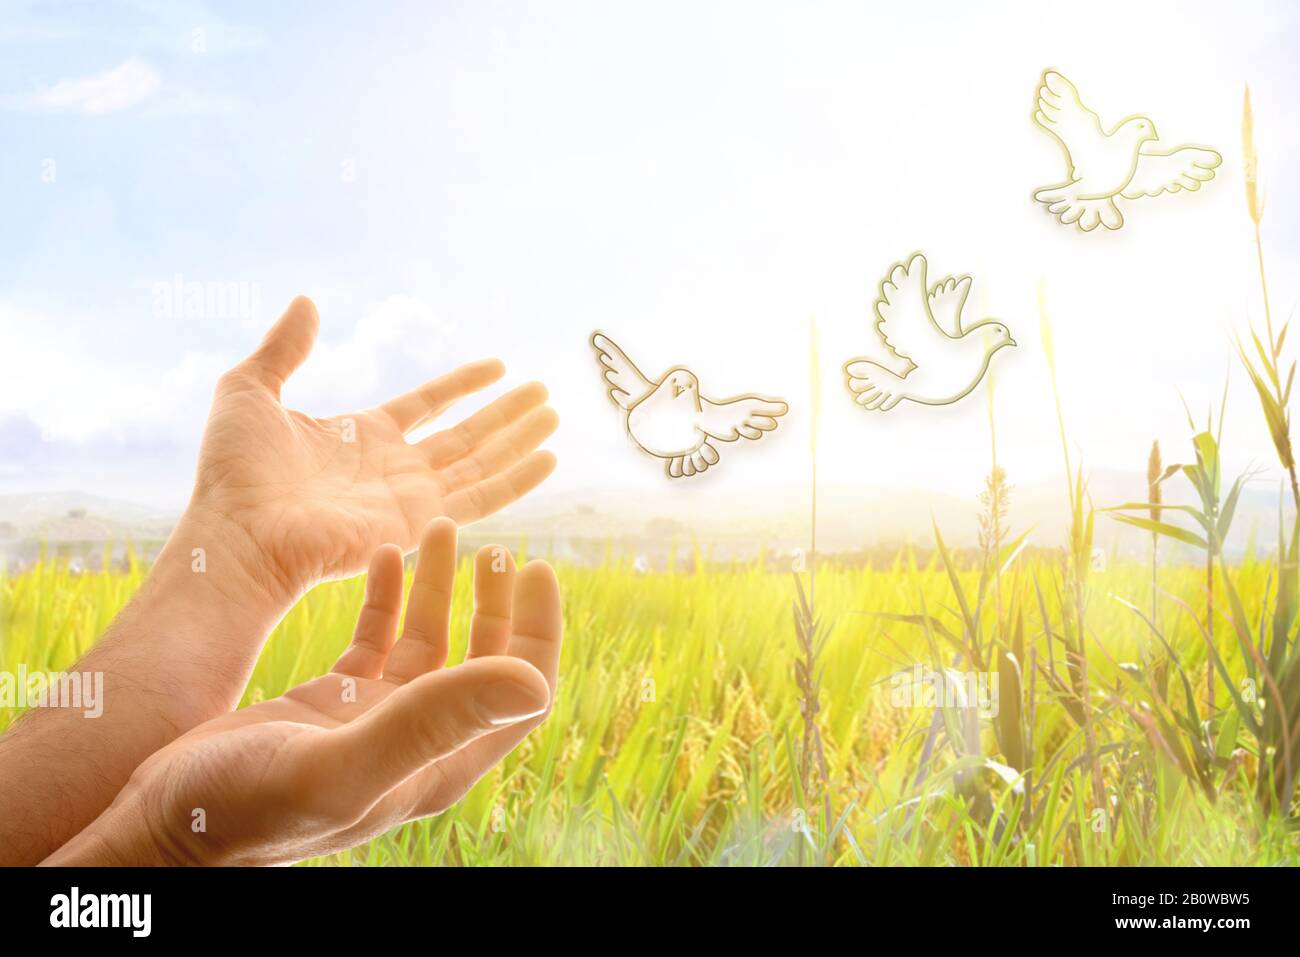 Hand releasing drawing shaped pigeons in the sky with wheat meadow background with spikes. Horizontal composition Stock Photo